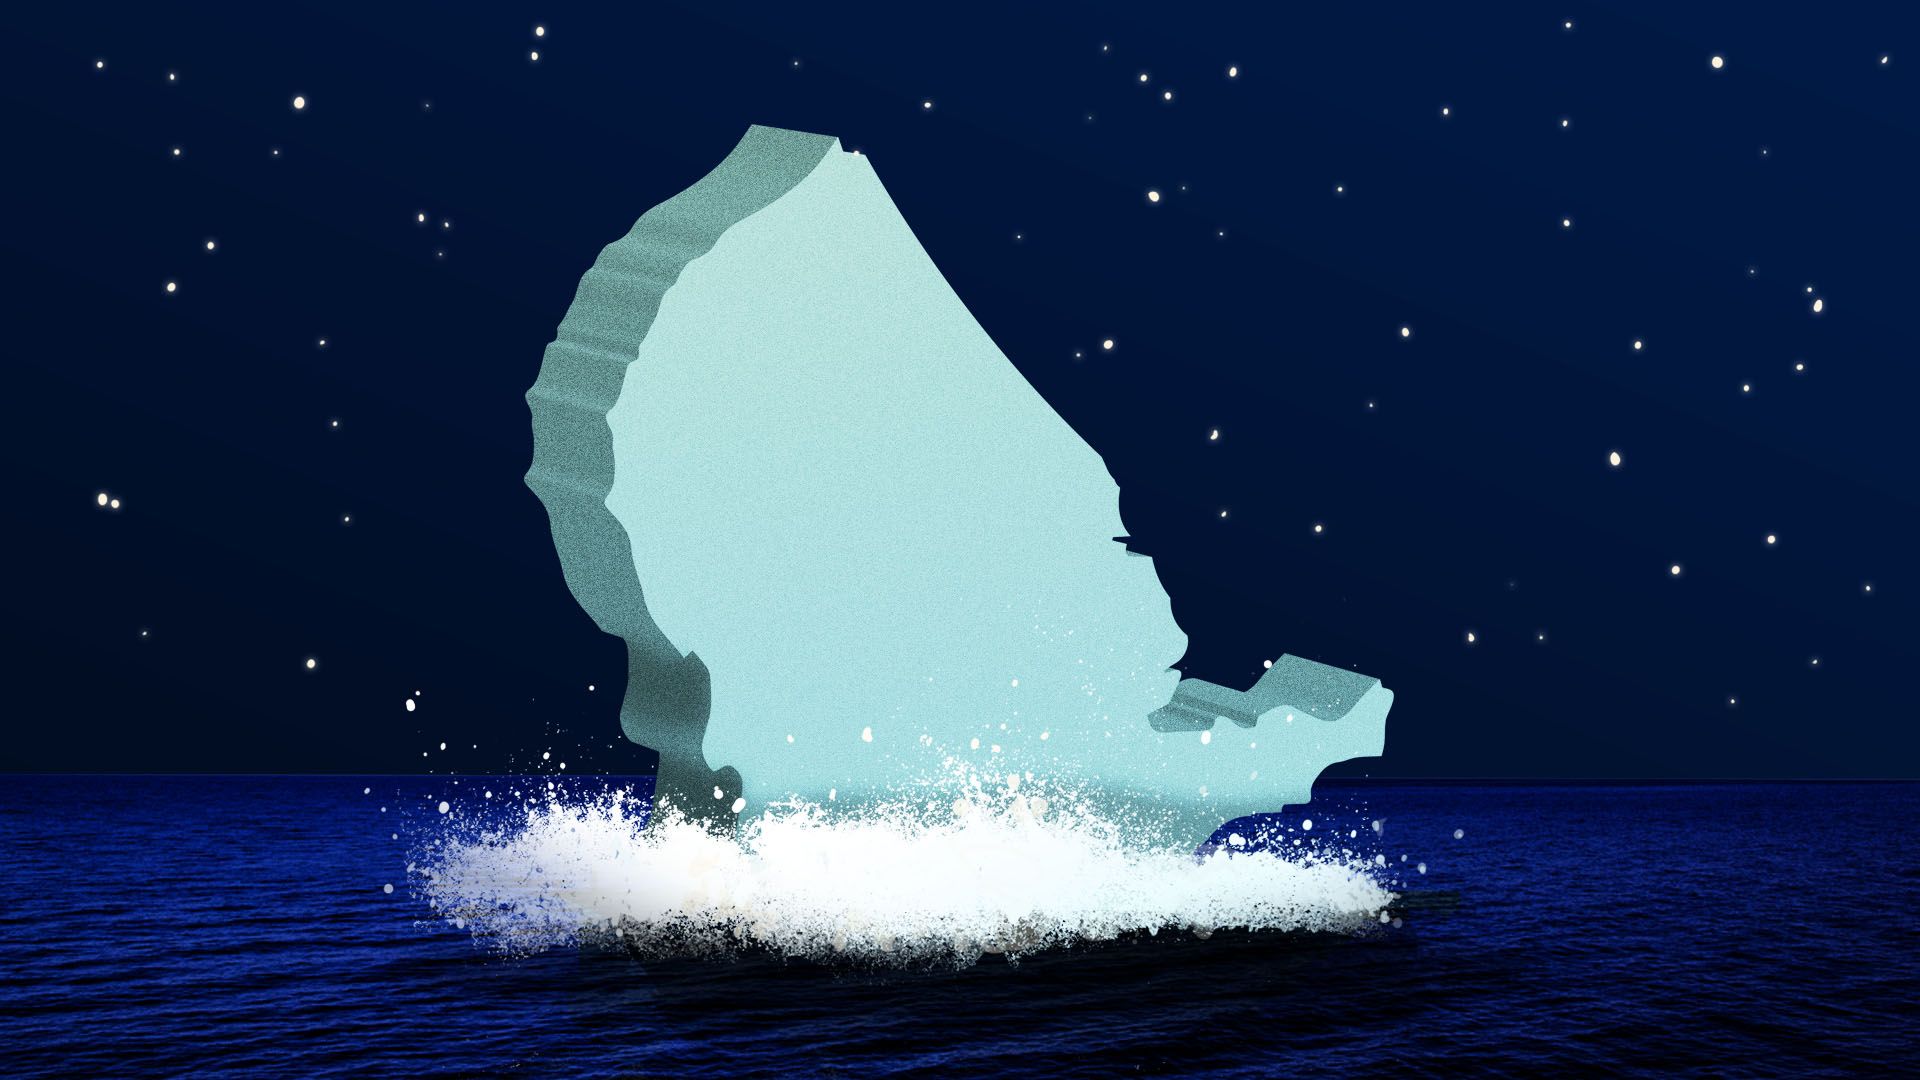 Illustration of the United States sinking into the ocean like the Titanic